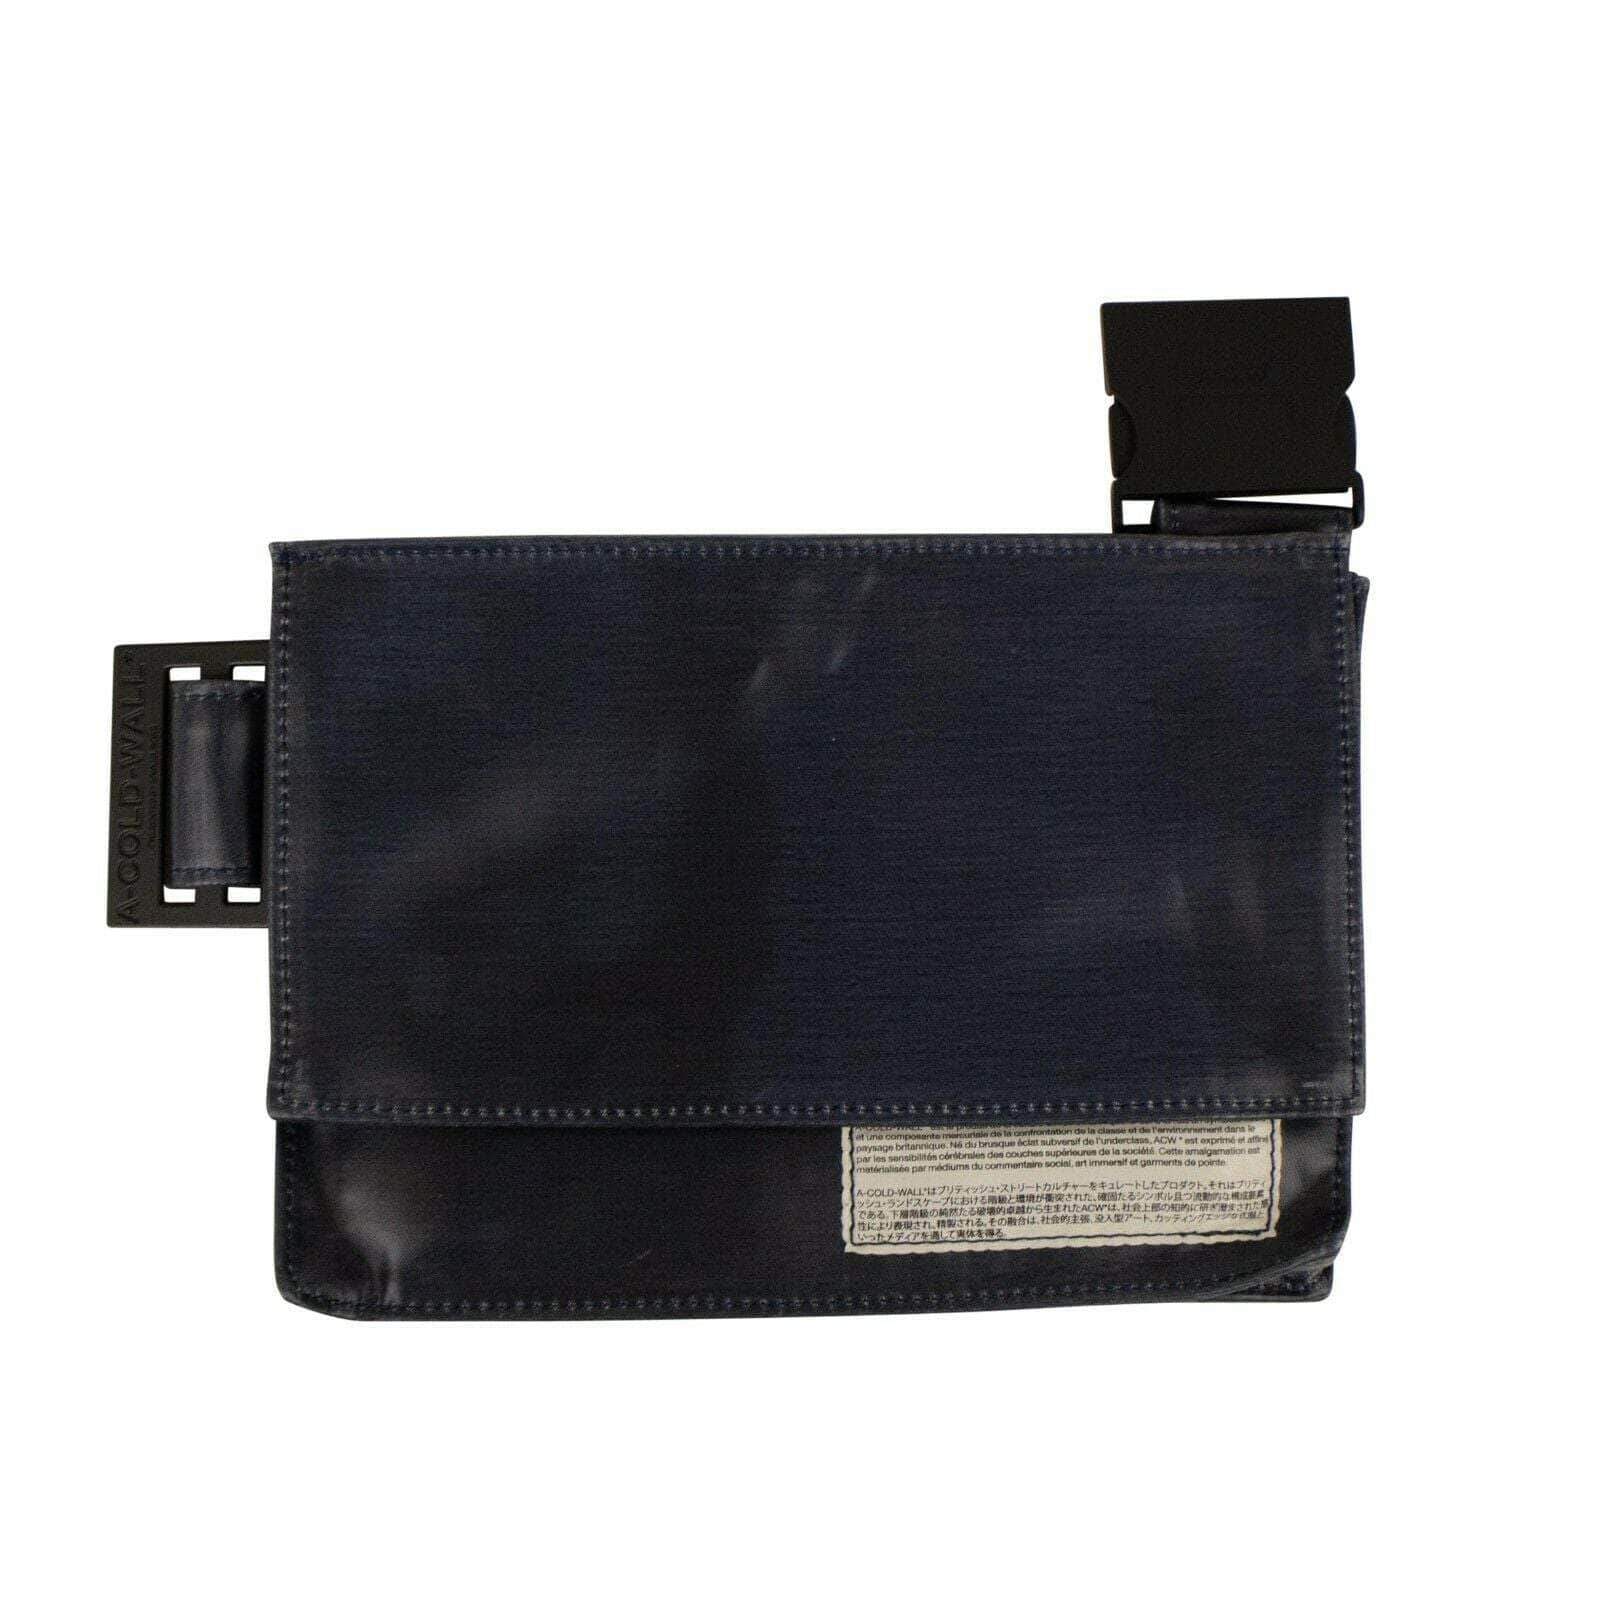 A-COLD-WALL* a-cold-wall, couponcollection, gender-mens, main-handbags, under-250 Leather Utility Crossbody Bag - Blue 87AB-ACW-3008 87AB-ACW-3008